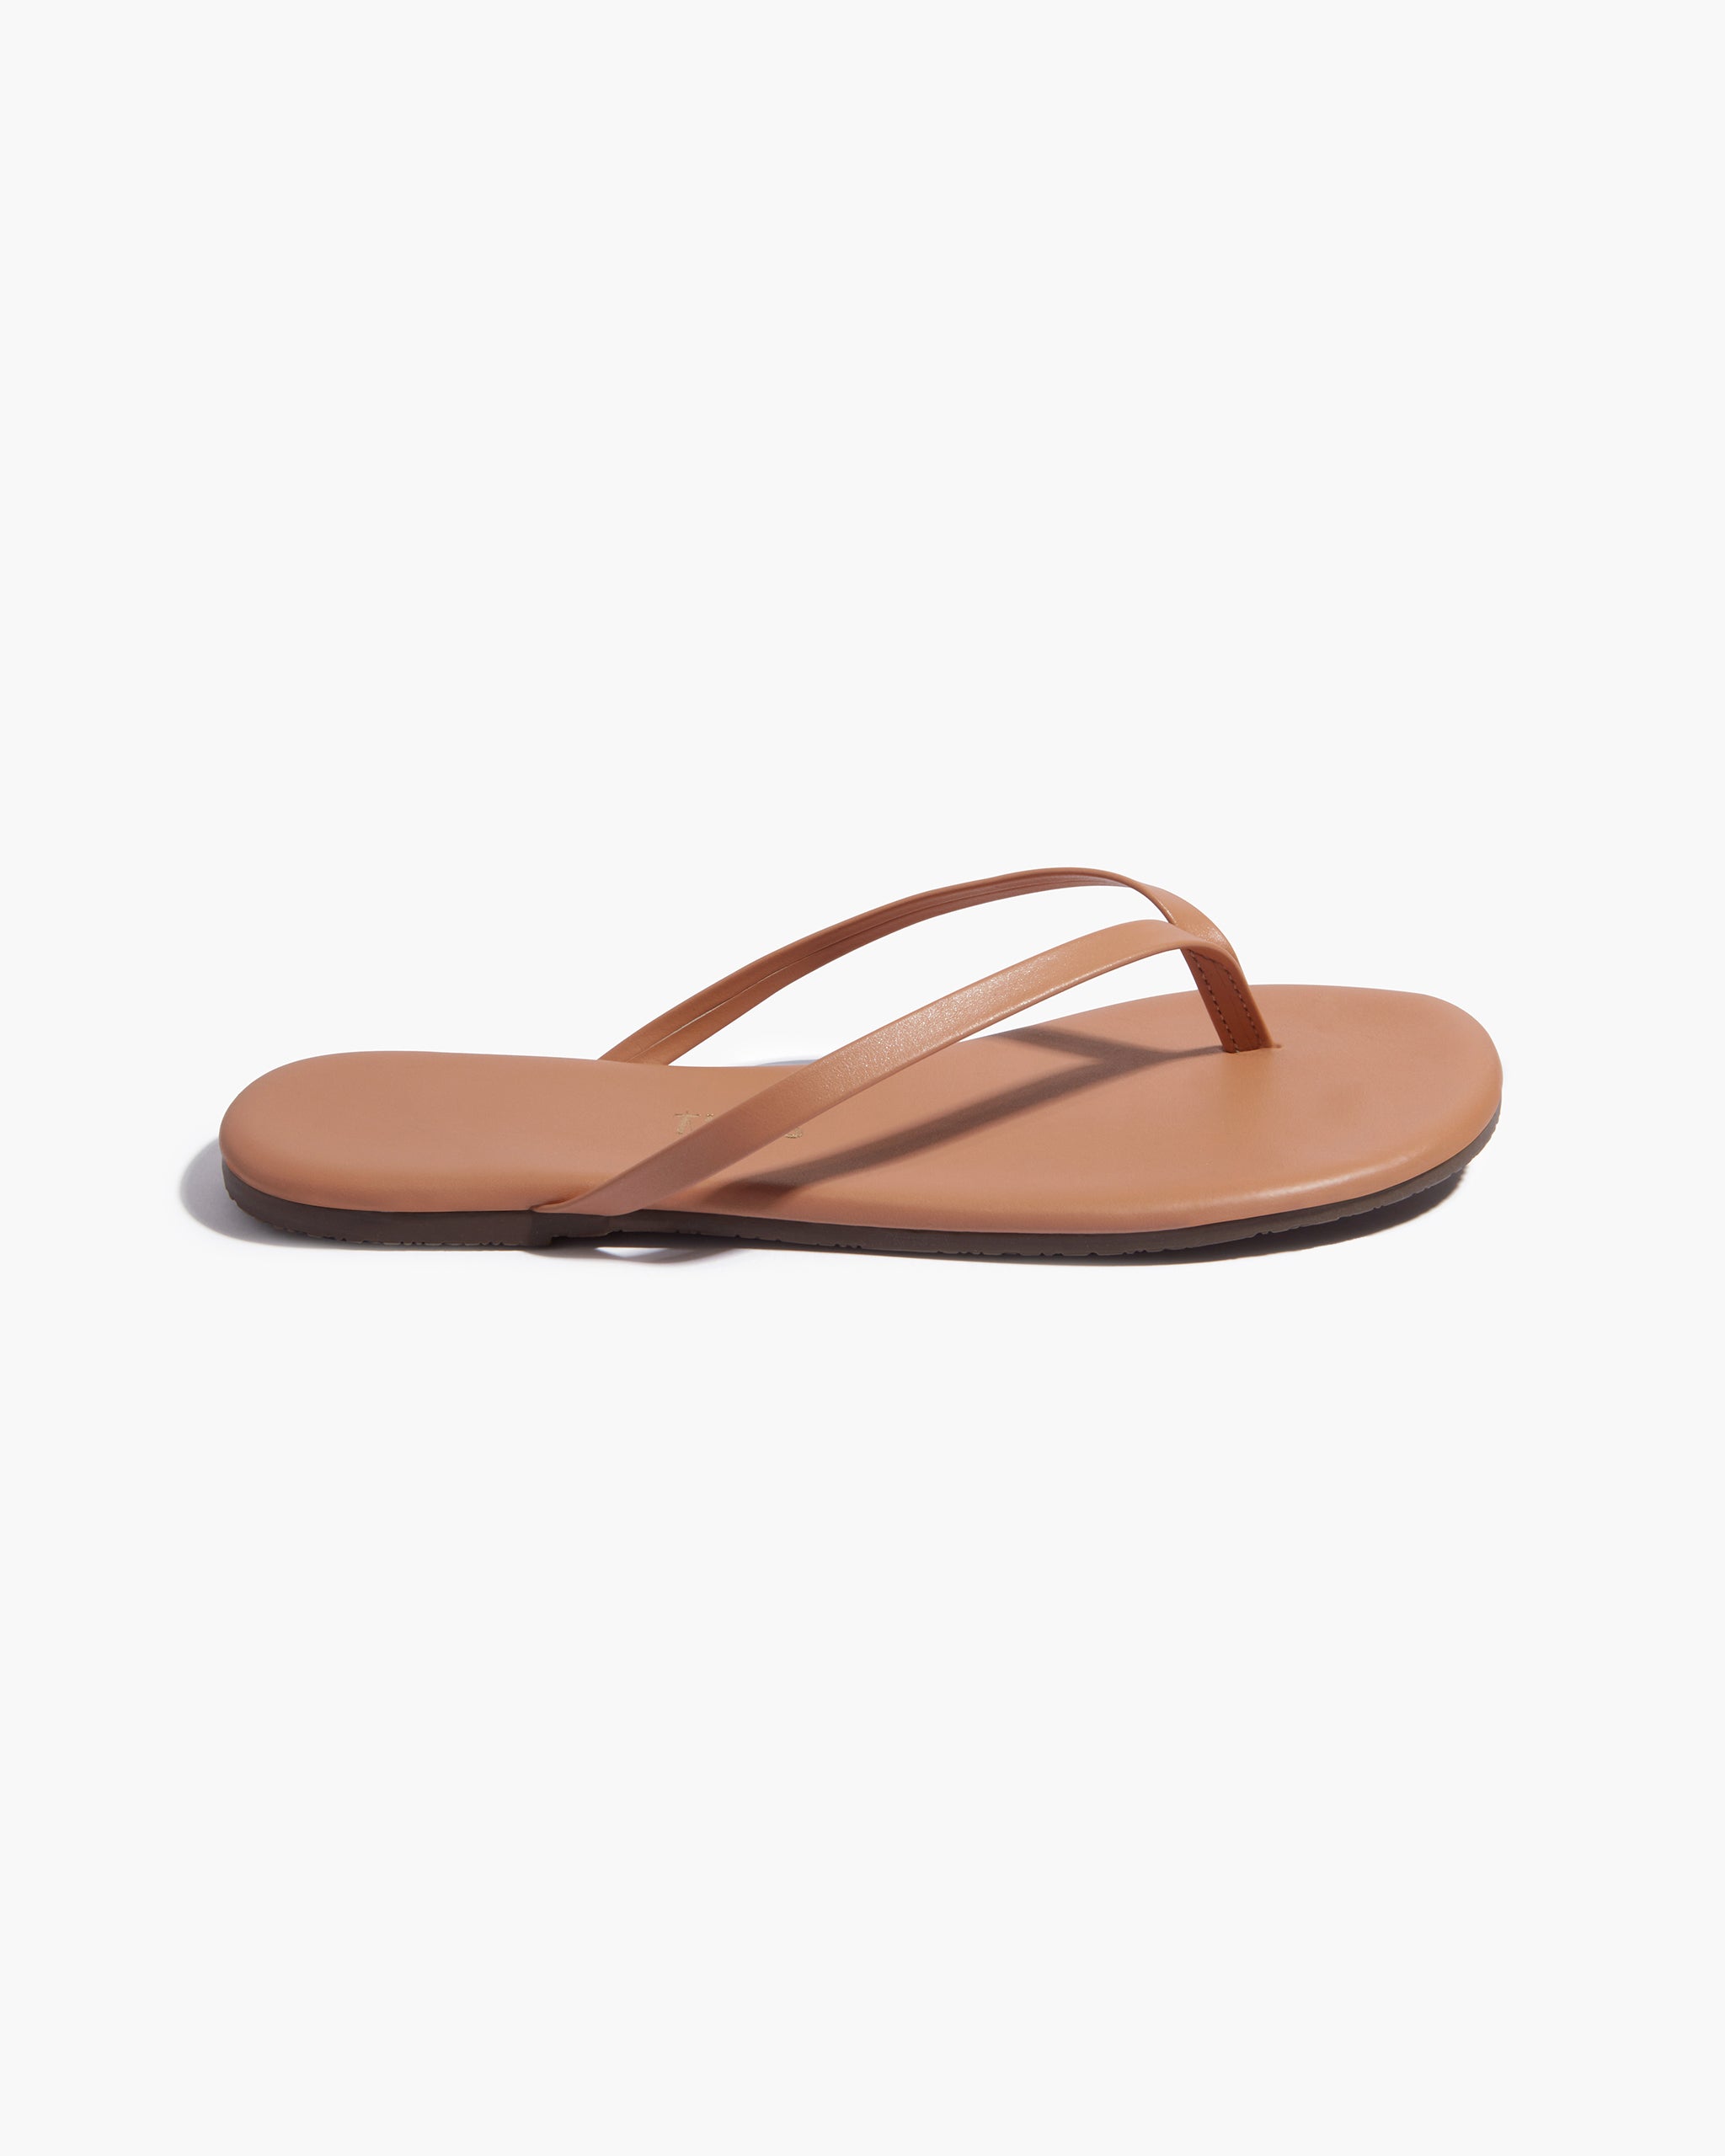 Lily Shimmers in Pout | Women's Sandals | TKEES – TKEES